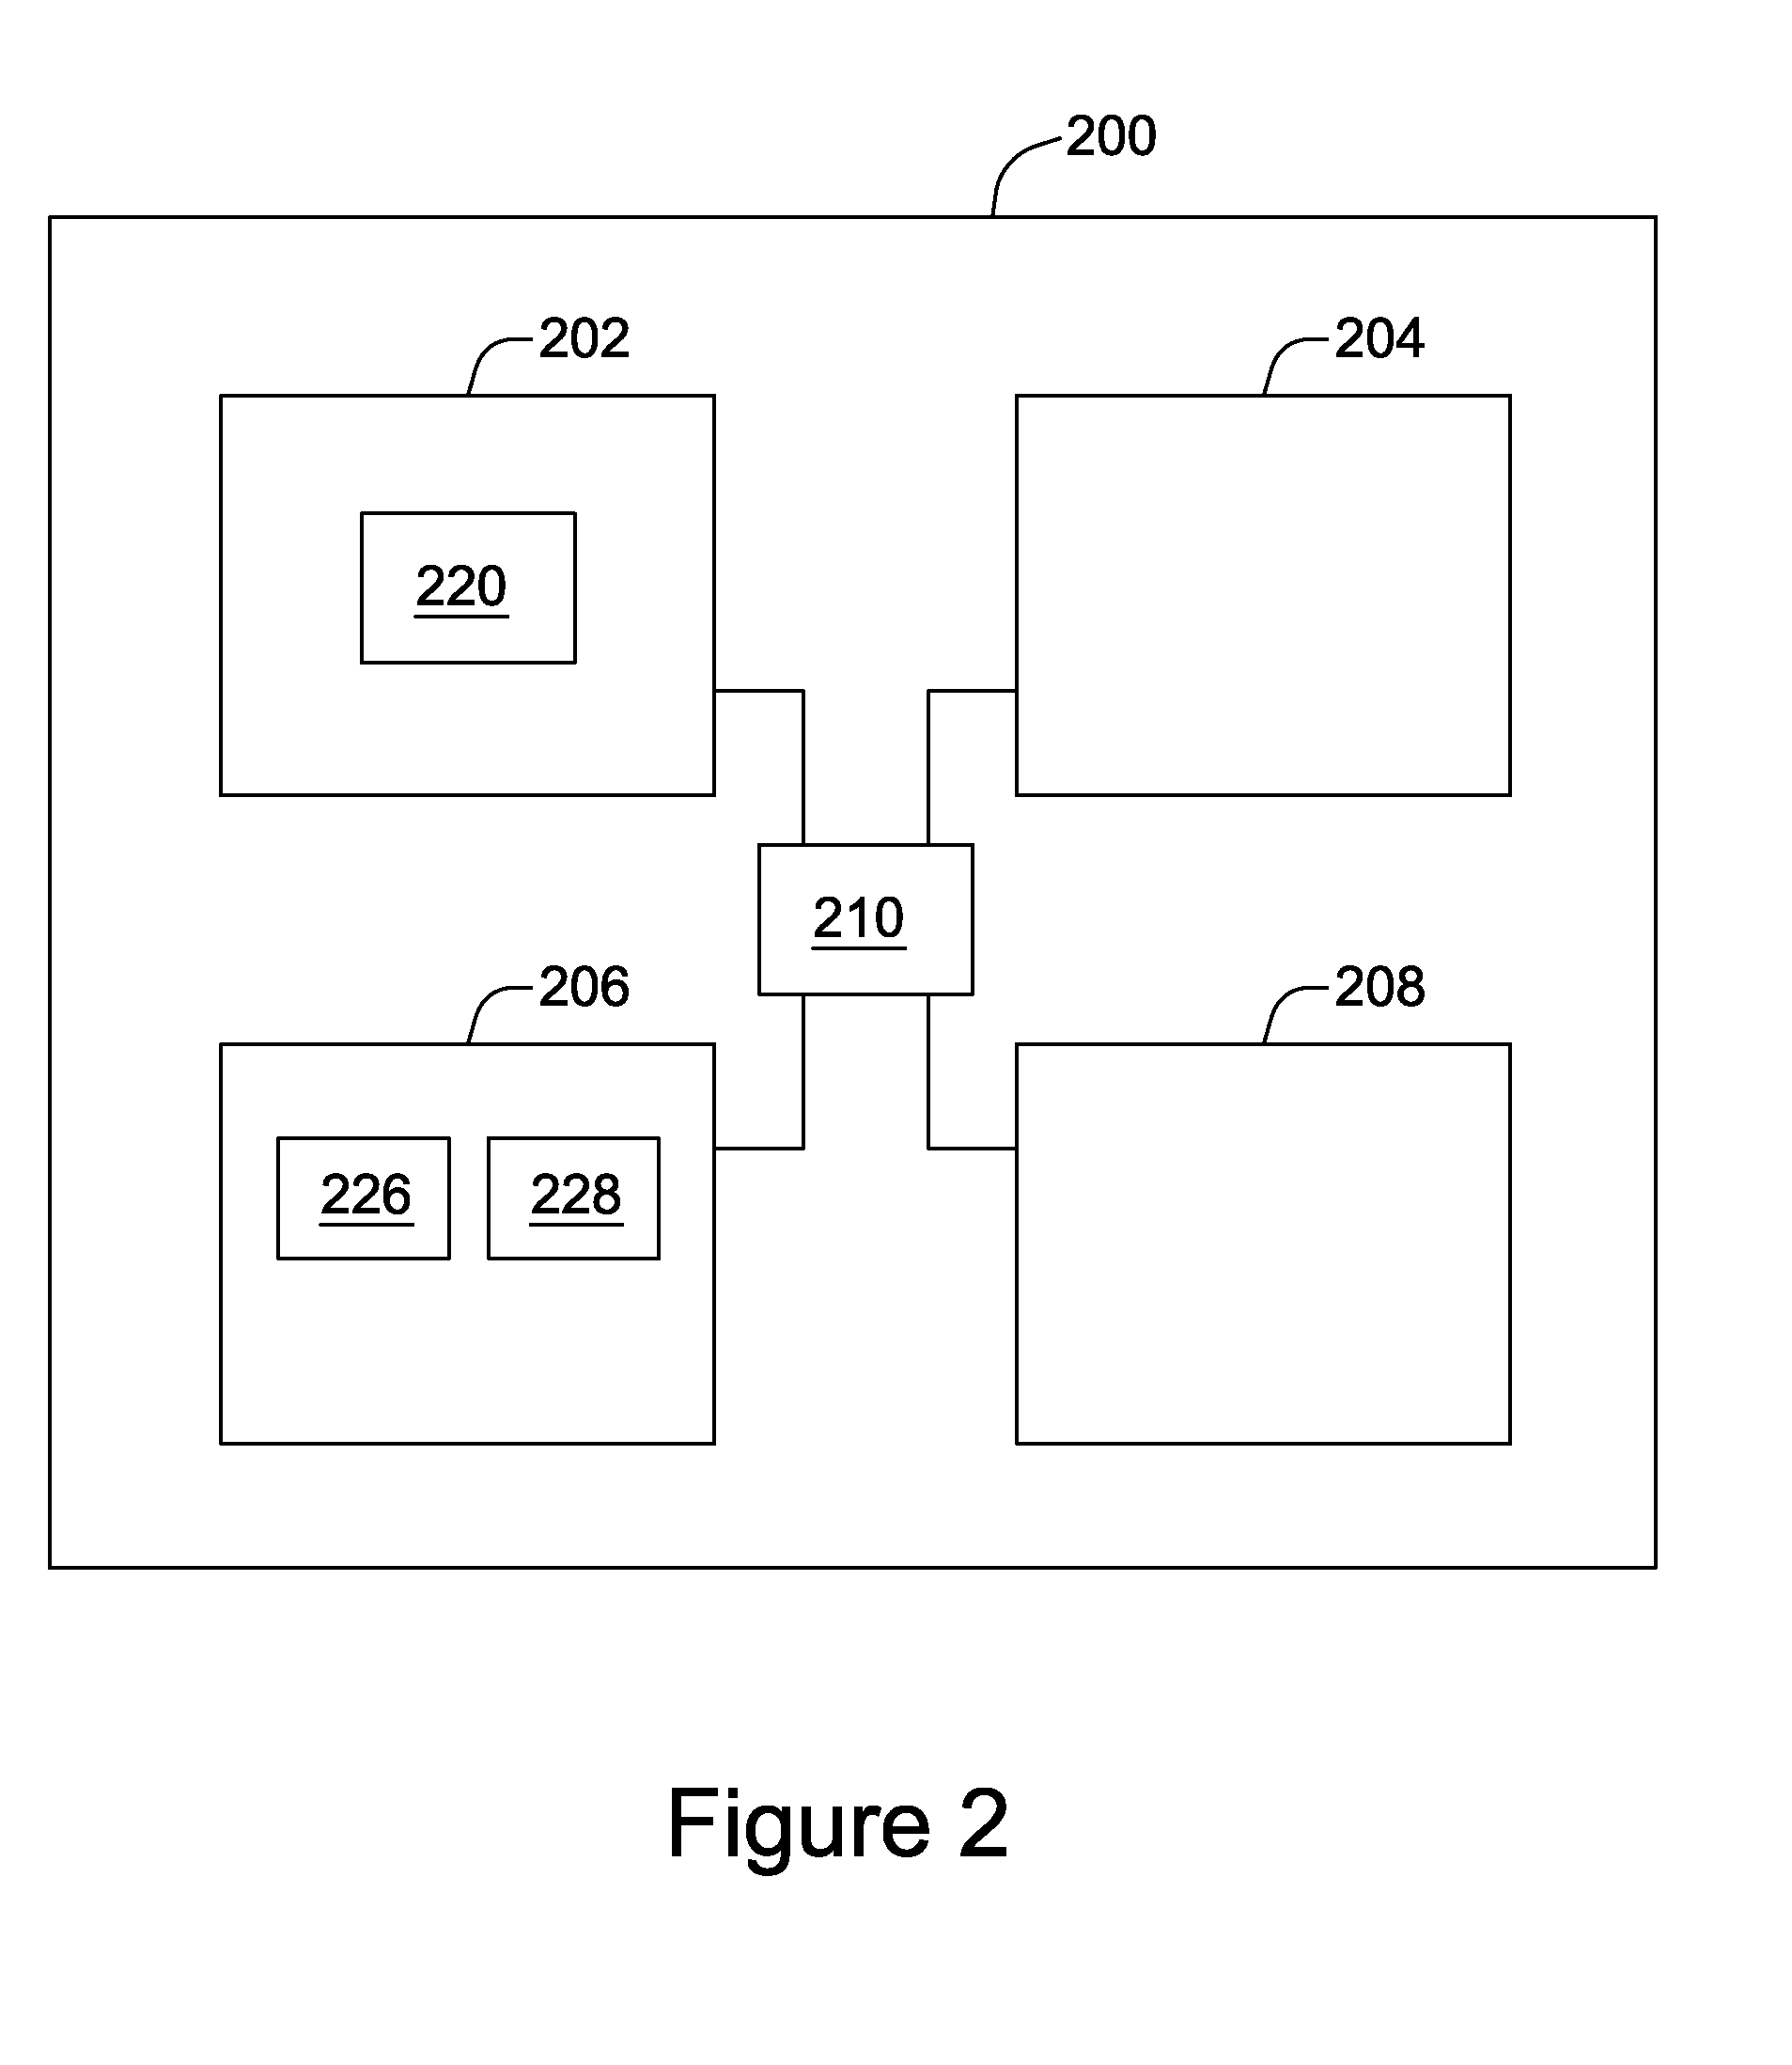 System and methods for situation awareness, advisory, tracking, and aircraft control information